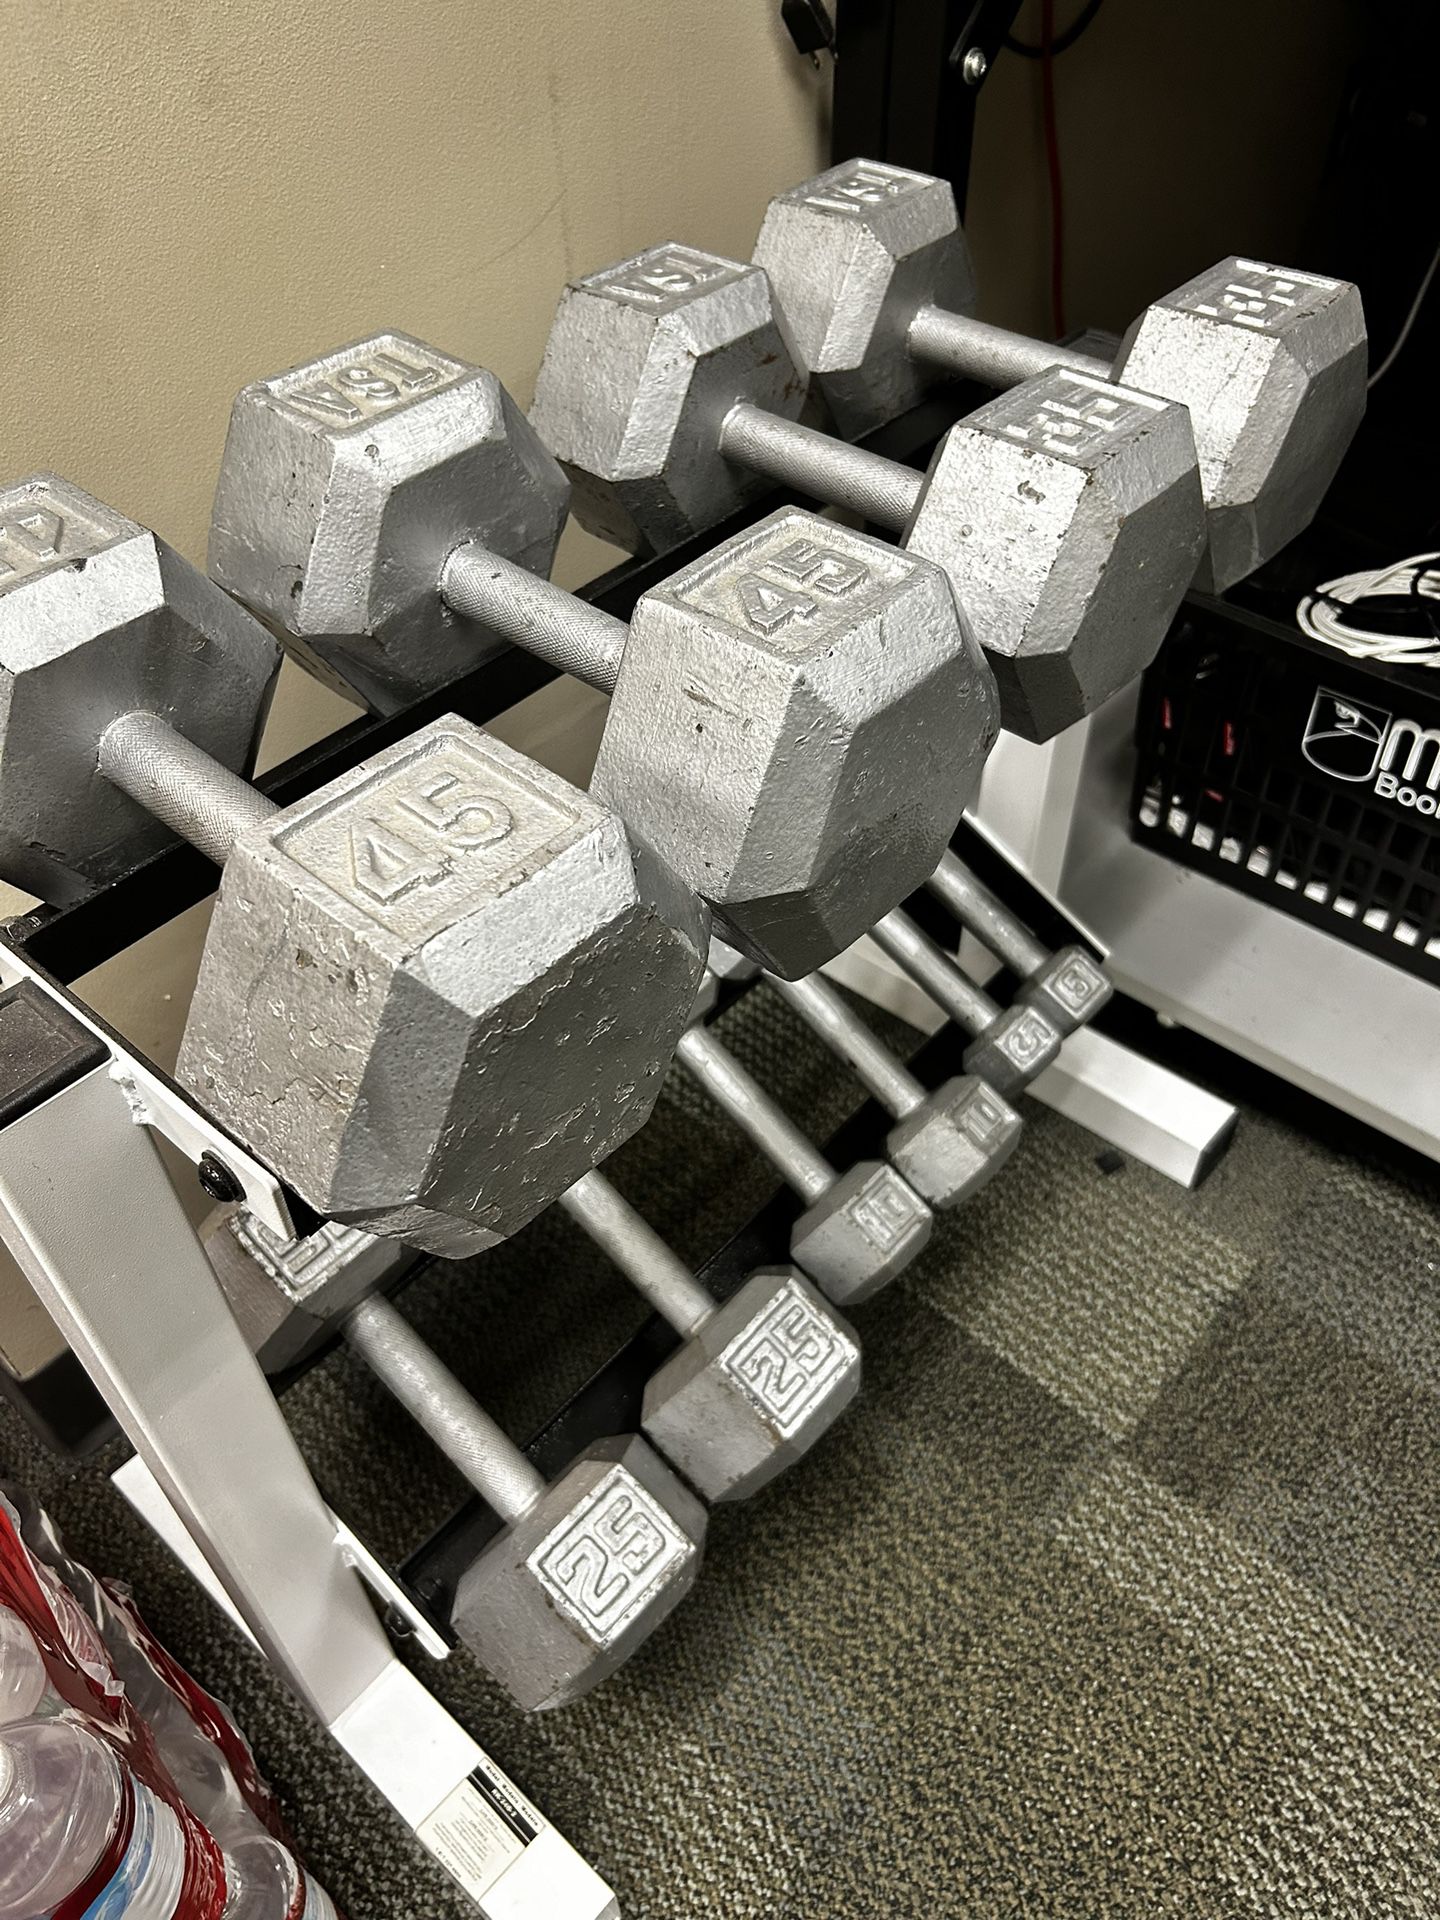 Weights With Dumbbell Rack, Bench